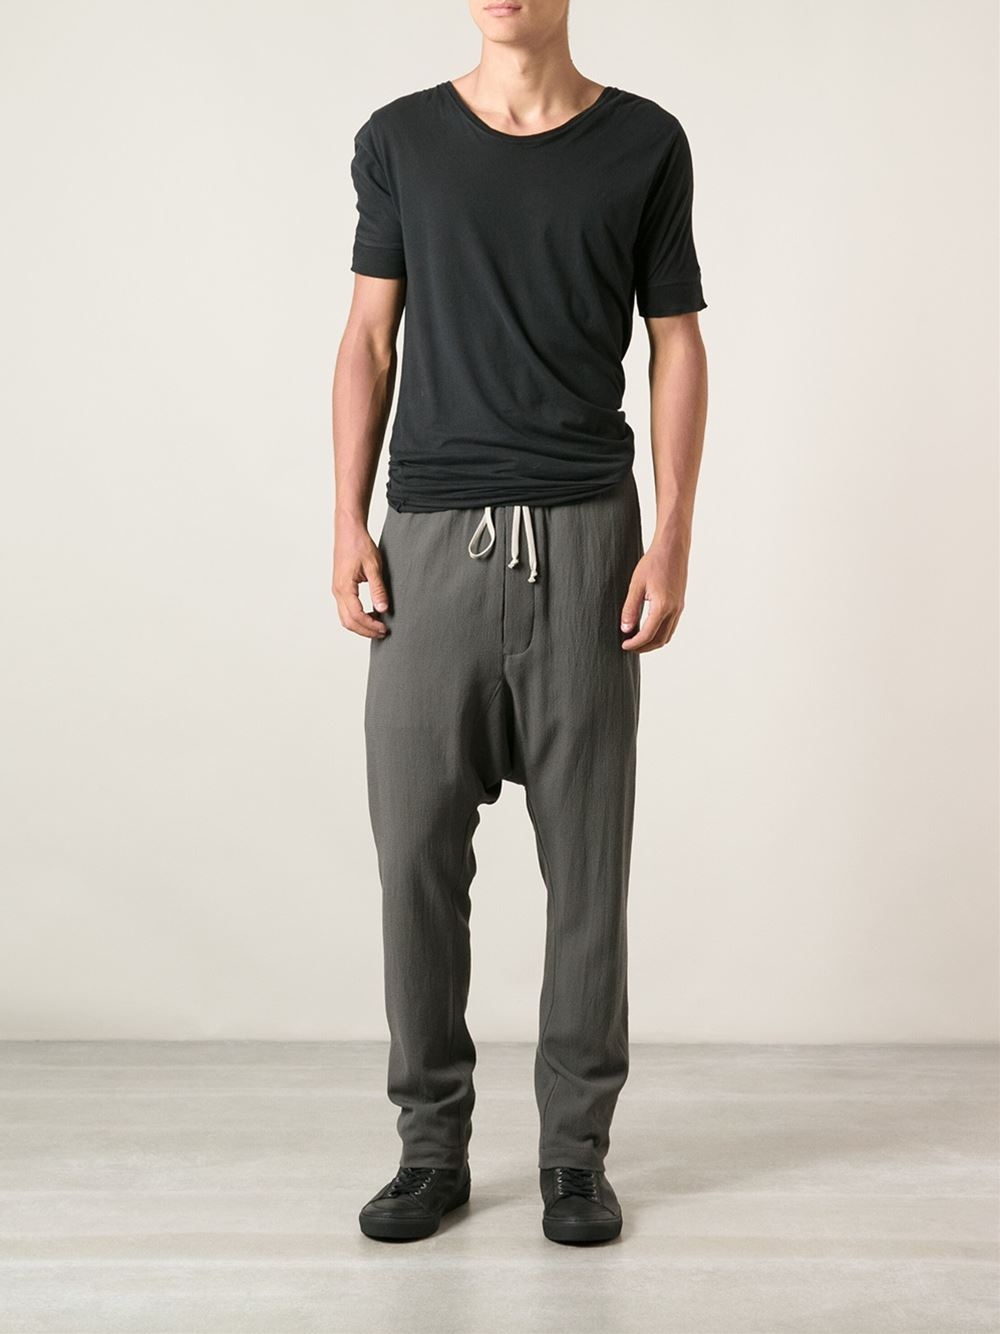 Lyst - Rick Owens Track Pants in Gray for Men